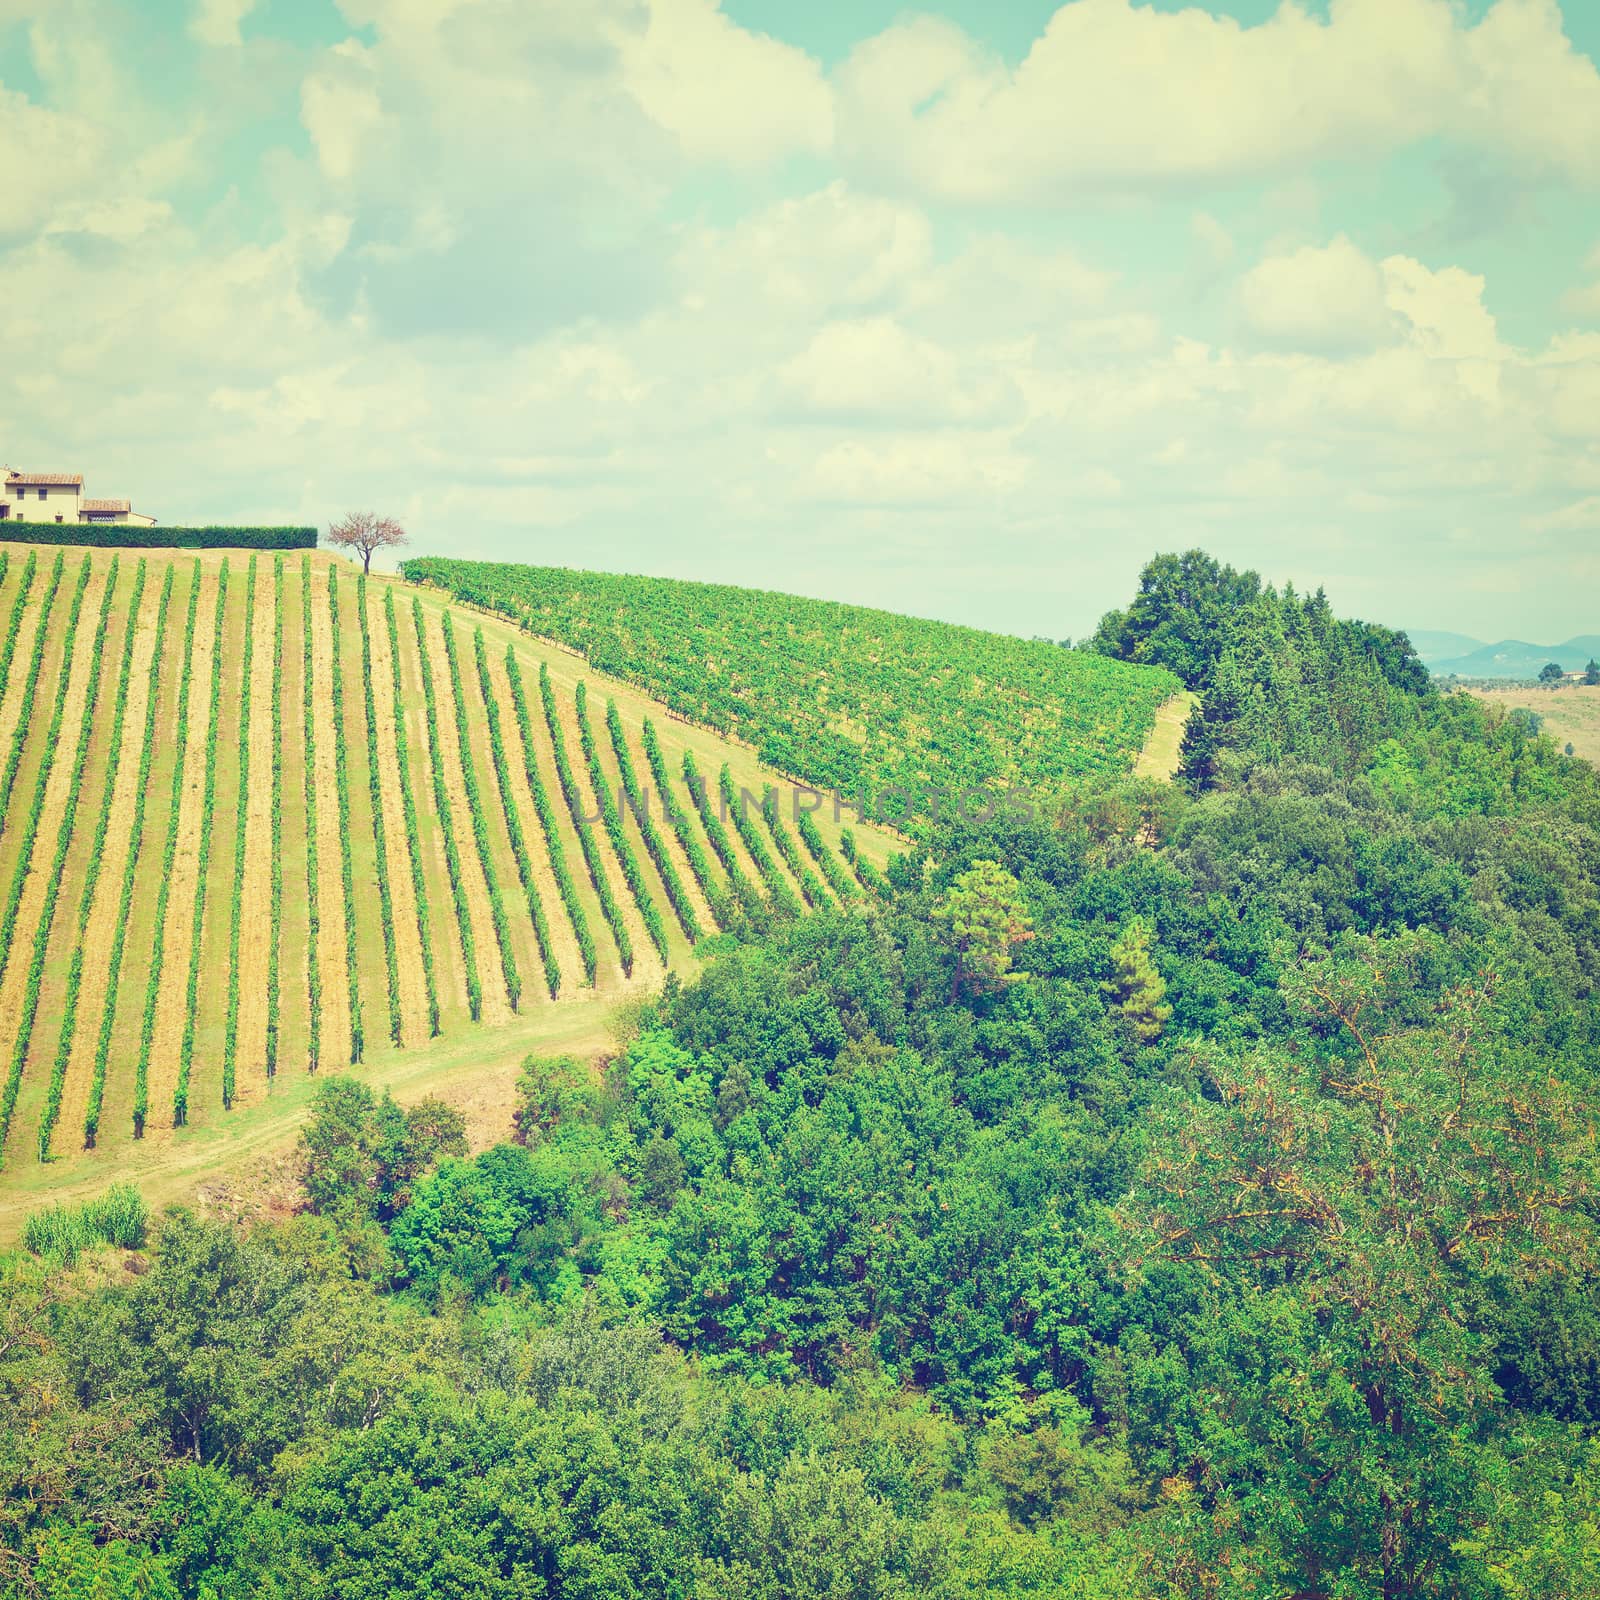 Hill of Tuscany with Vineyard in the Chianti Region, Instagram Effect